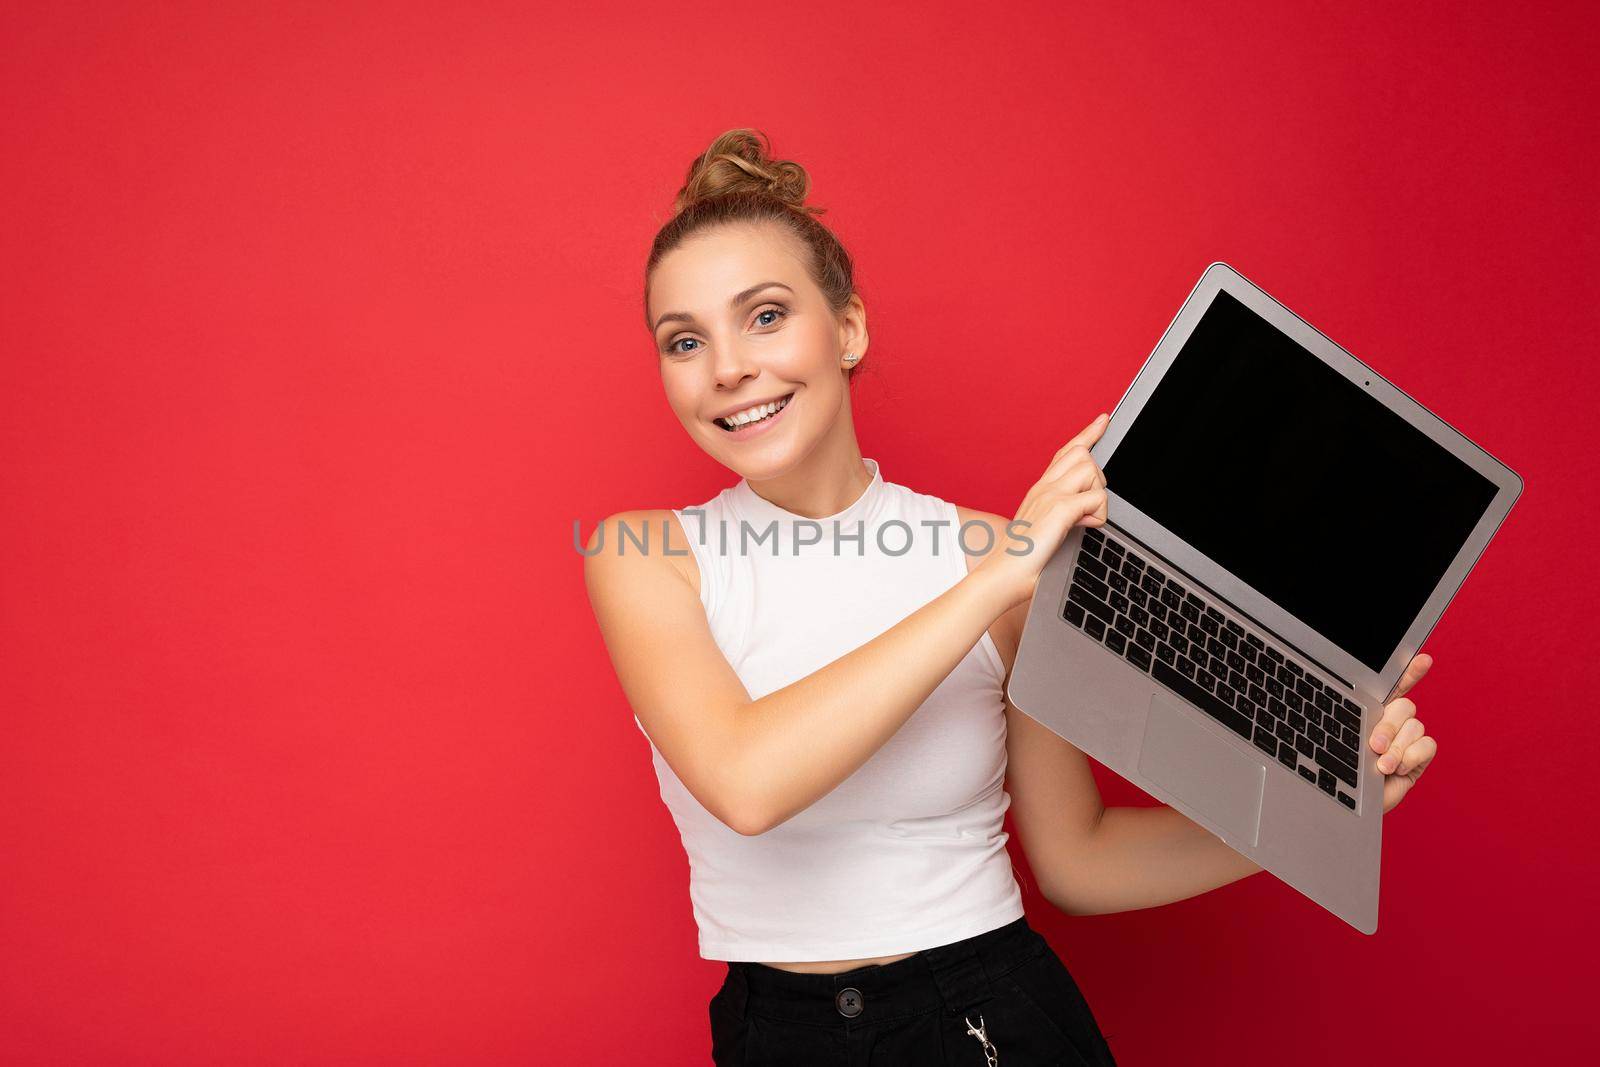 beautiful smiling fascinating happy blond young woman with gathered hair looking at camera holding computer laptop wearing white t-shirt isolated over red wall background by TRMK